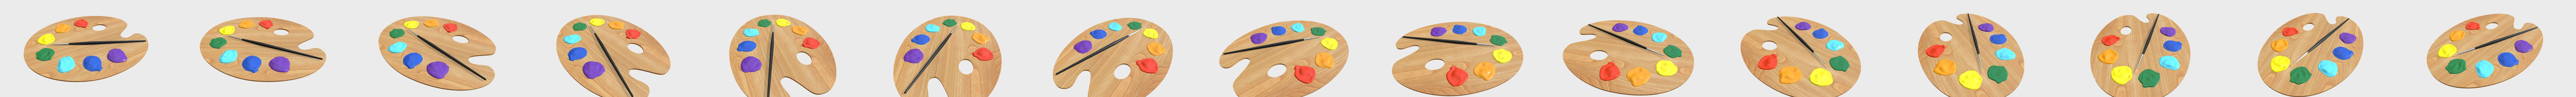 3D model Palette for painting with gouache and watercolors VR / AR /  low-poly